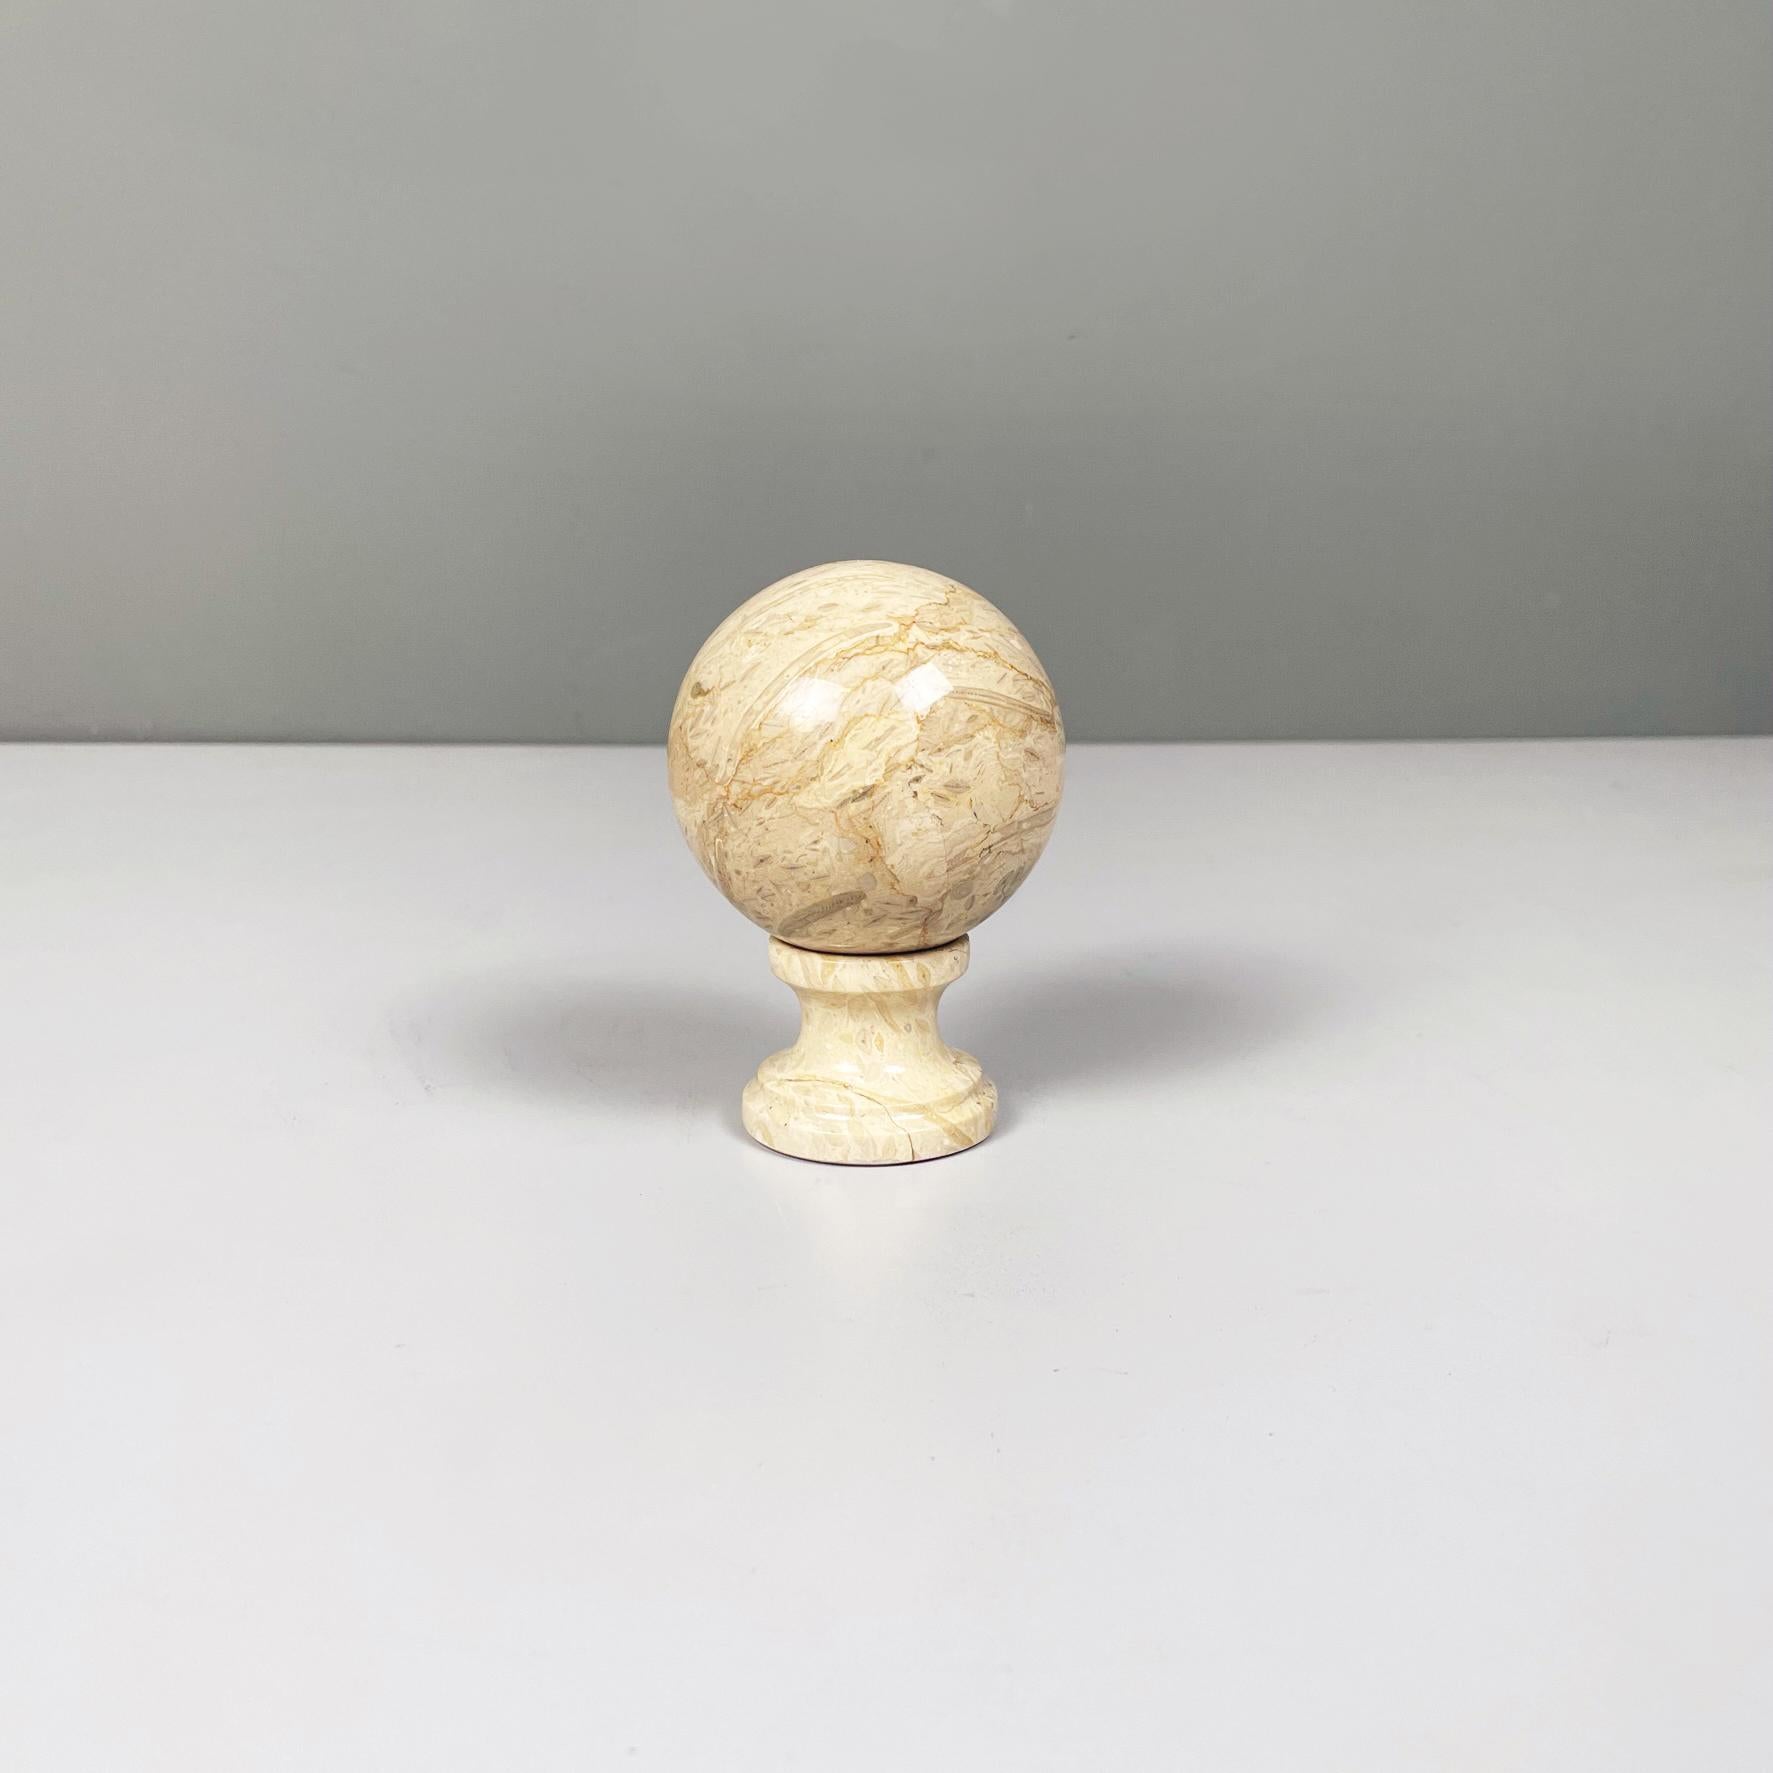 Italian midcentury Geometric spherical sculpture in beige onyx stone, 1960s
Geometric sculpture in light brown-beige onyx stone, composed of a sphere resting on a small round base.
1960s.
Very good conditions, it has a defect on the base.